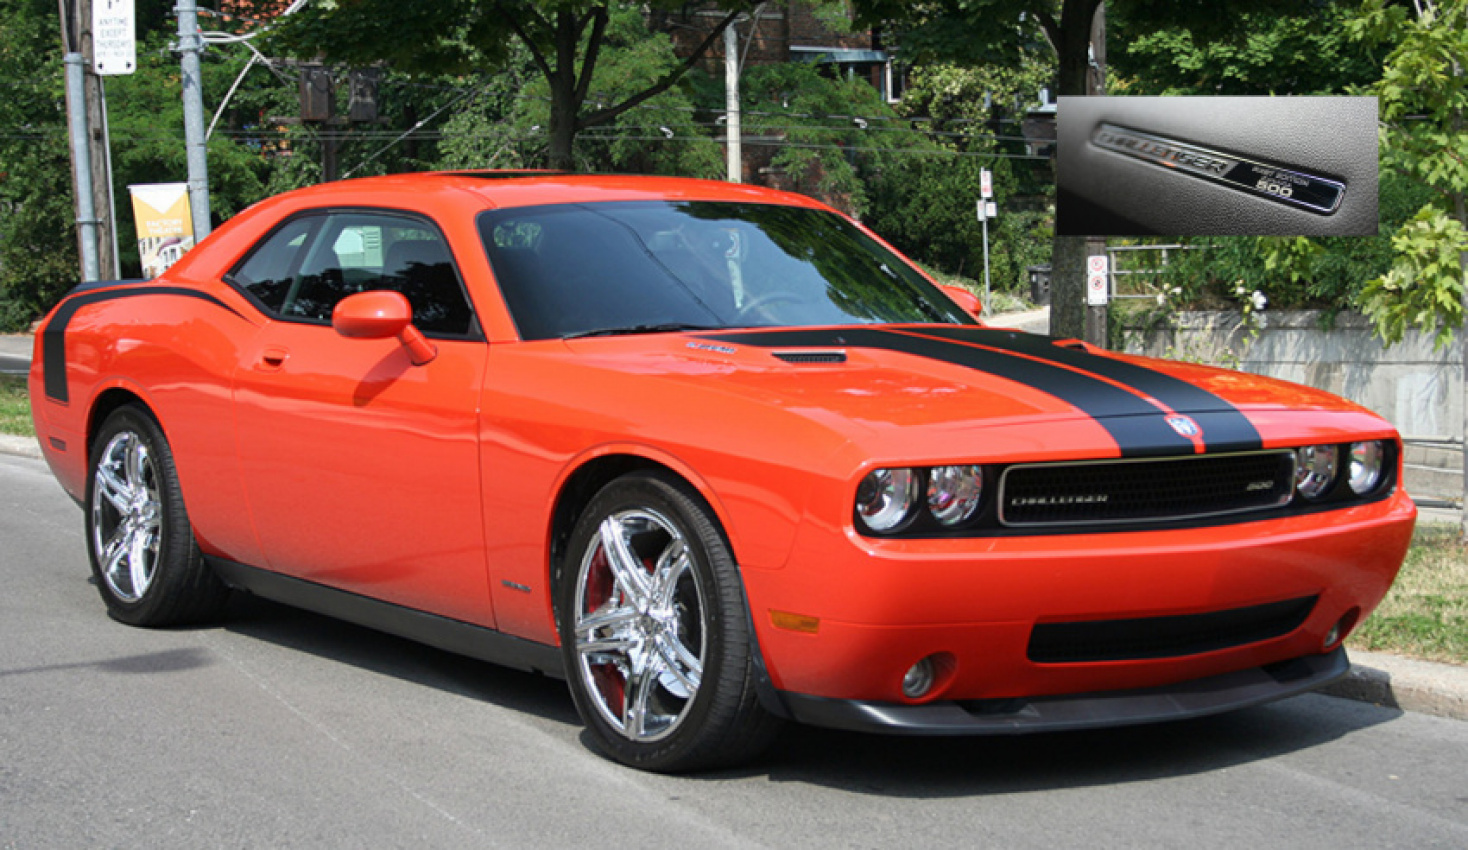 autos, cars, classic cars, dodge, 3rd generation challenger guides, 2008 dodge challenger guide: specs, performance & more